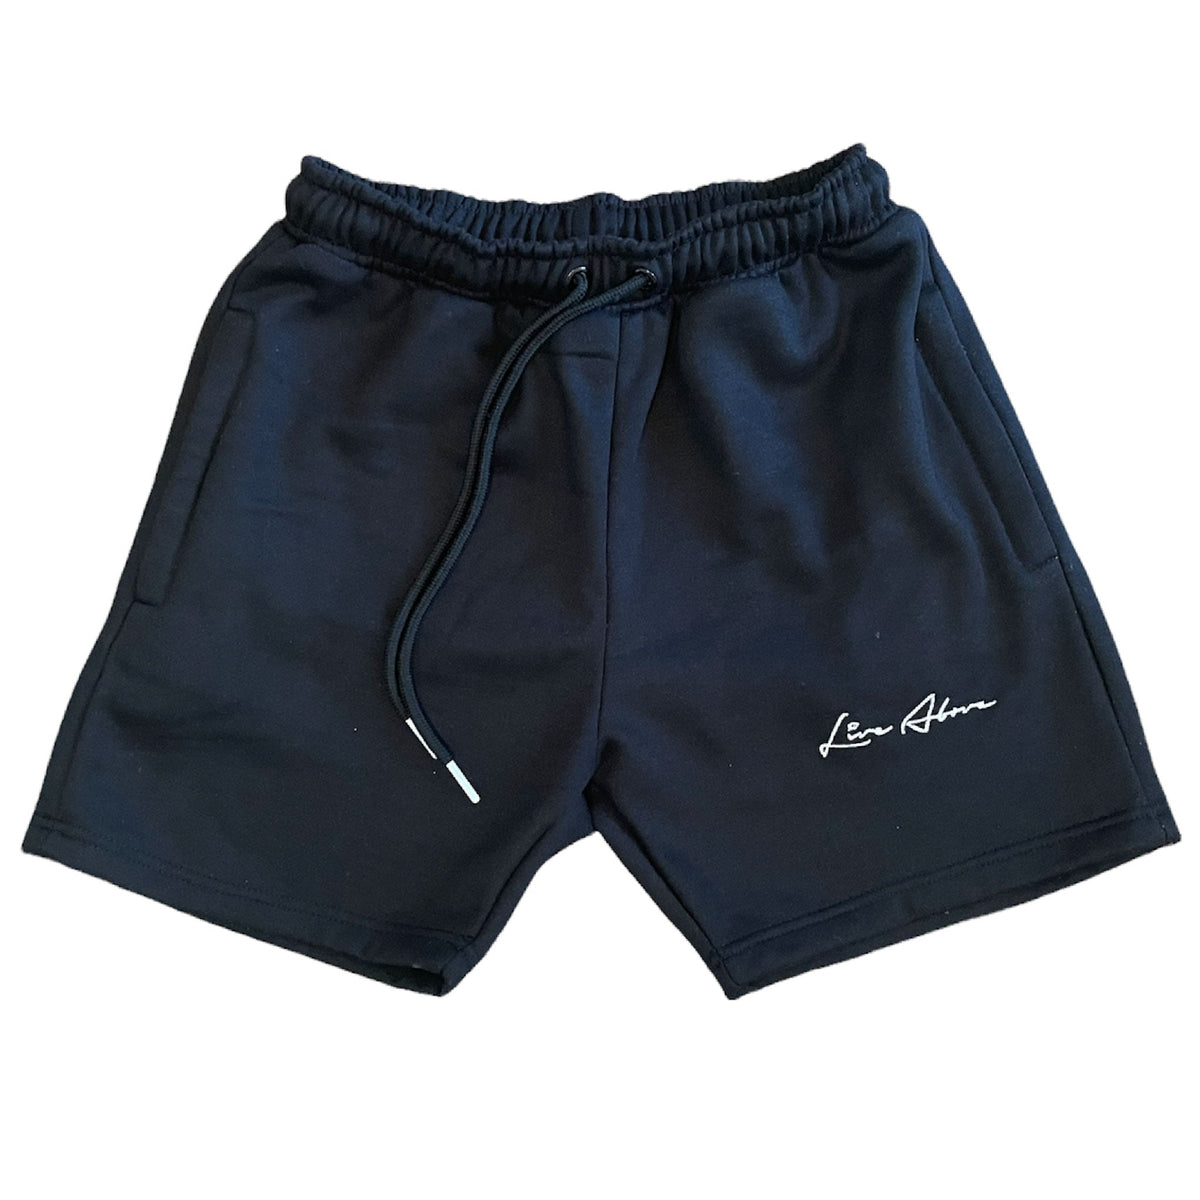 Signature French Terry Shorts- Black - The Shade Room Shop